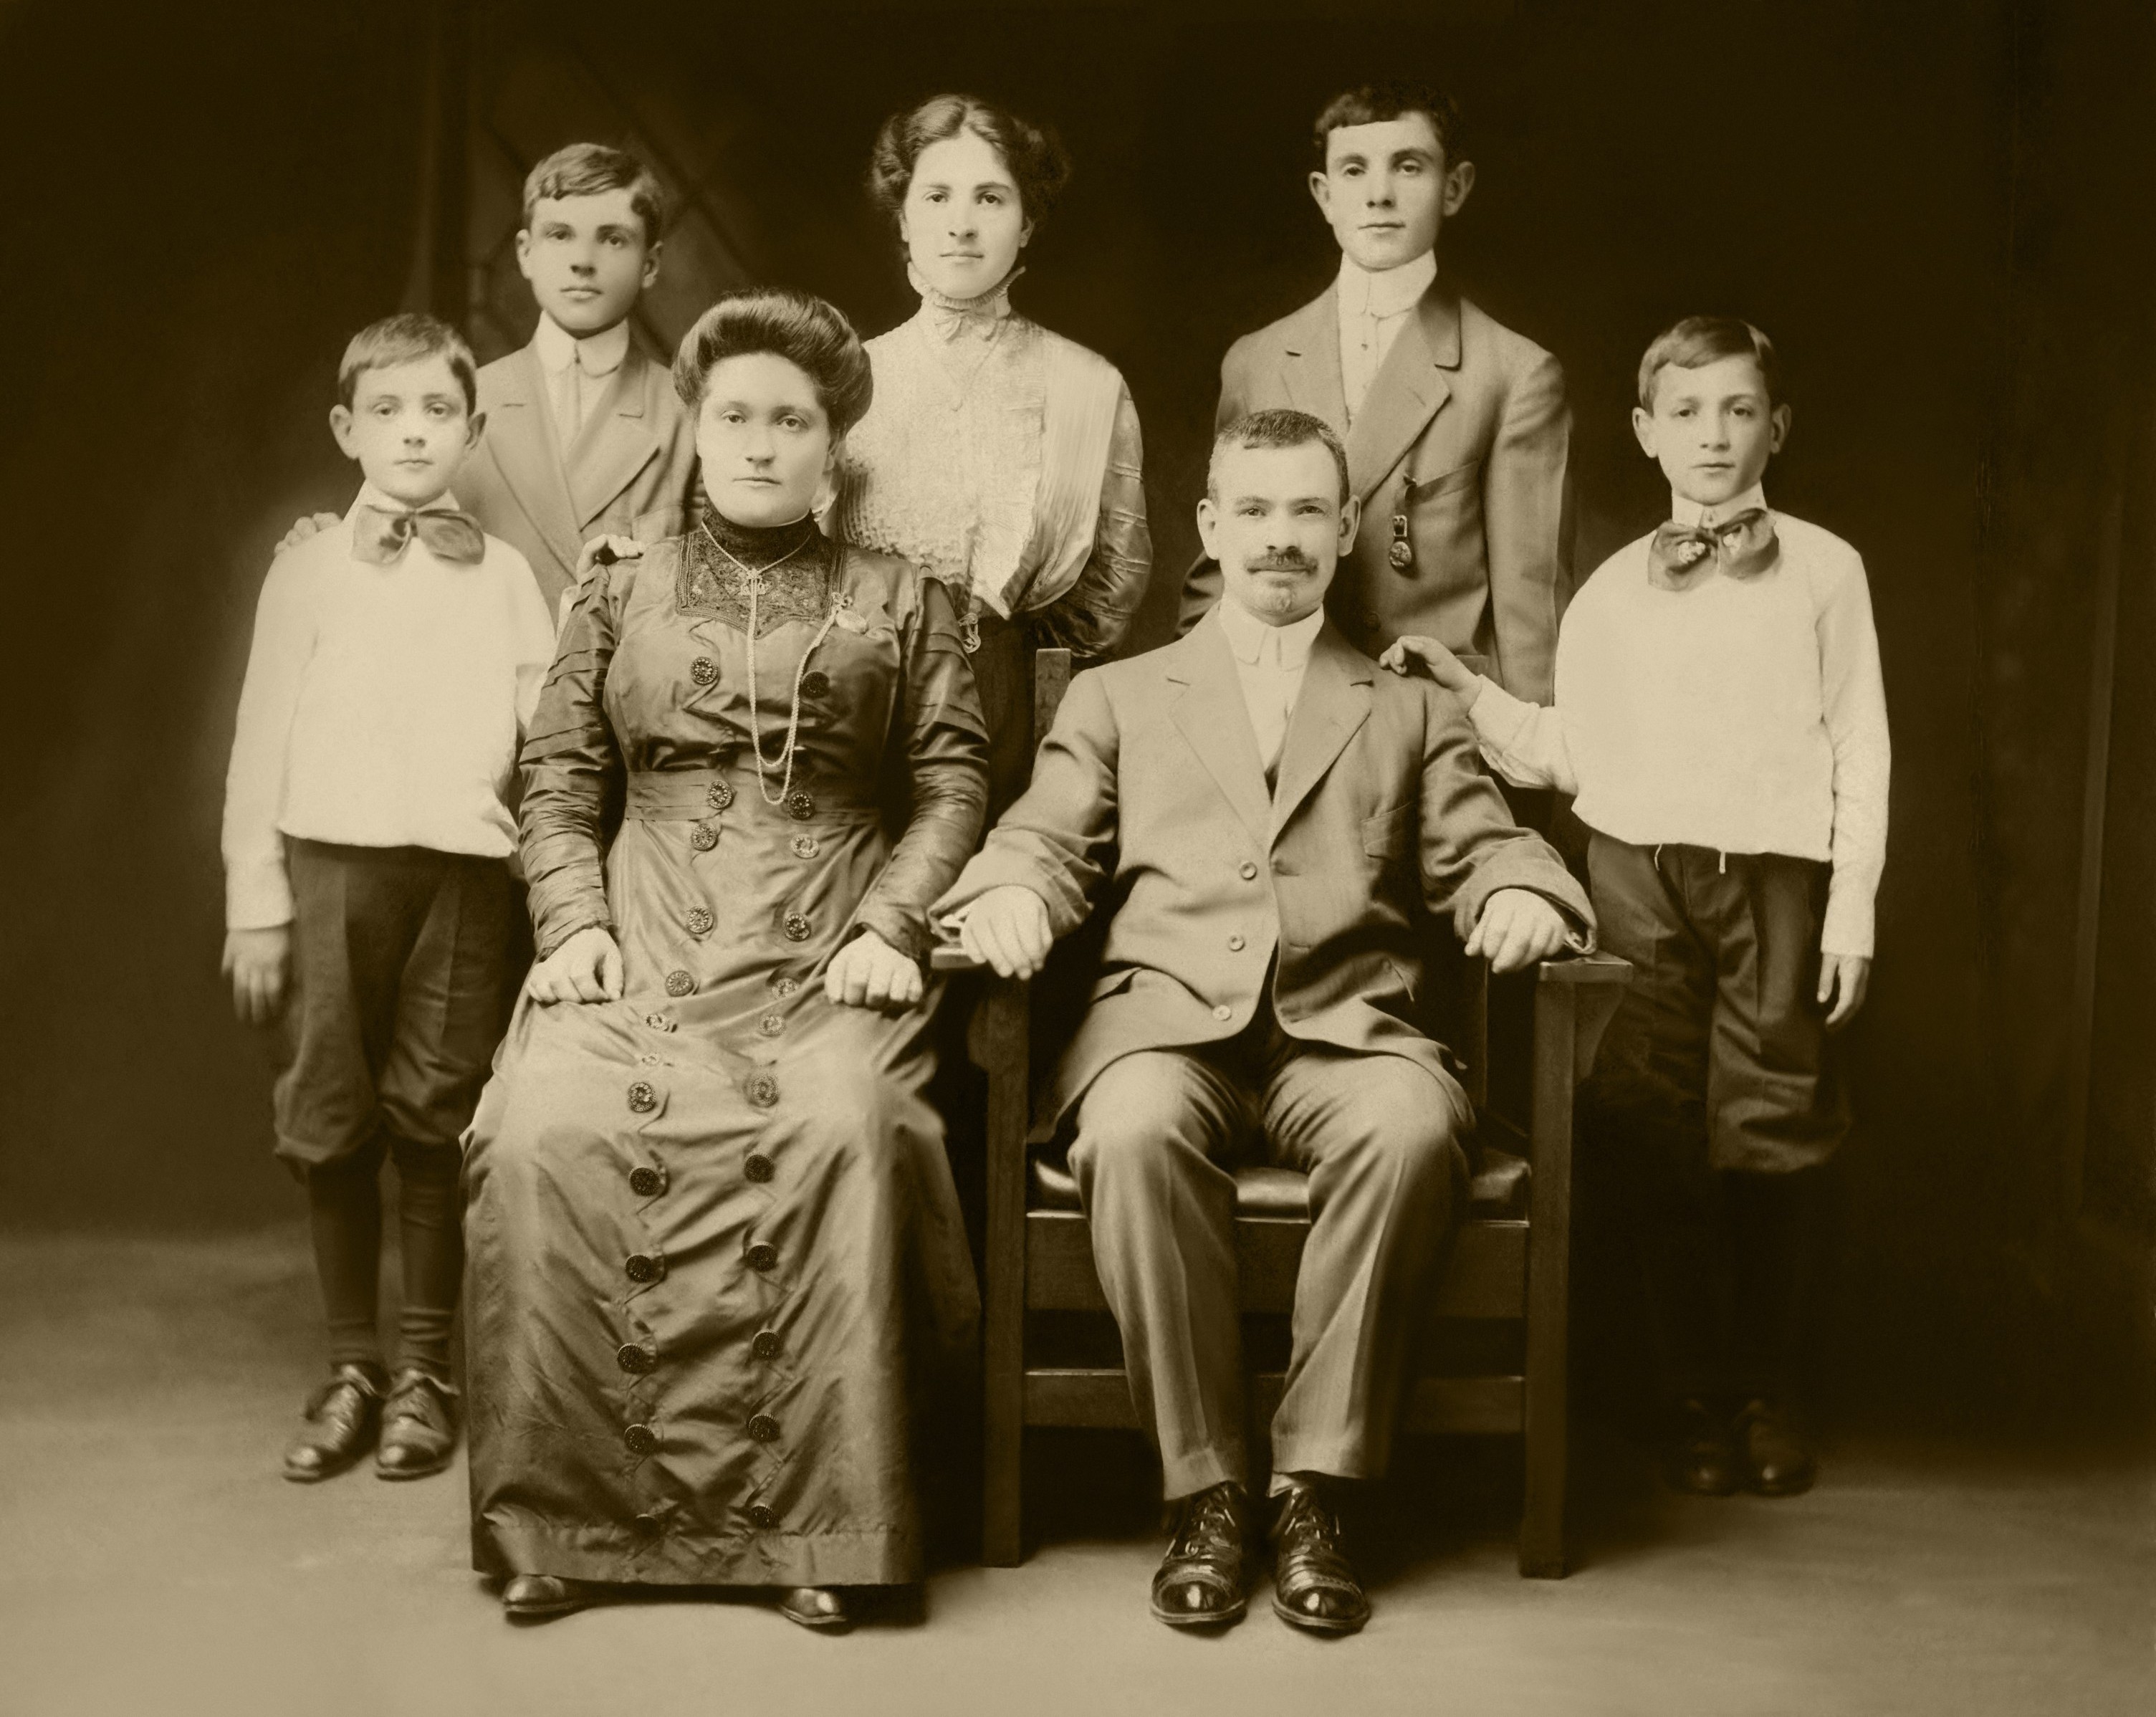 Libby, Peter, & family 1907